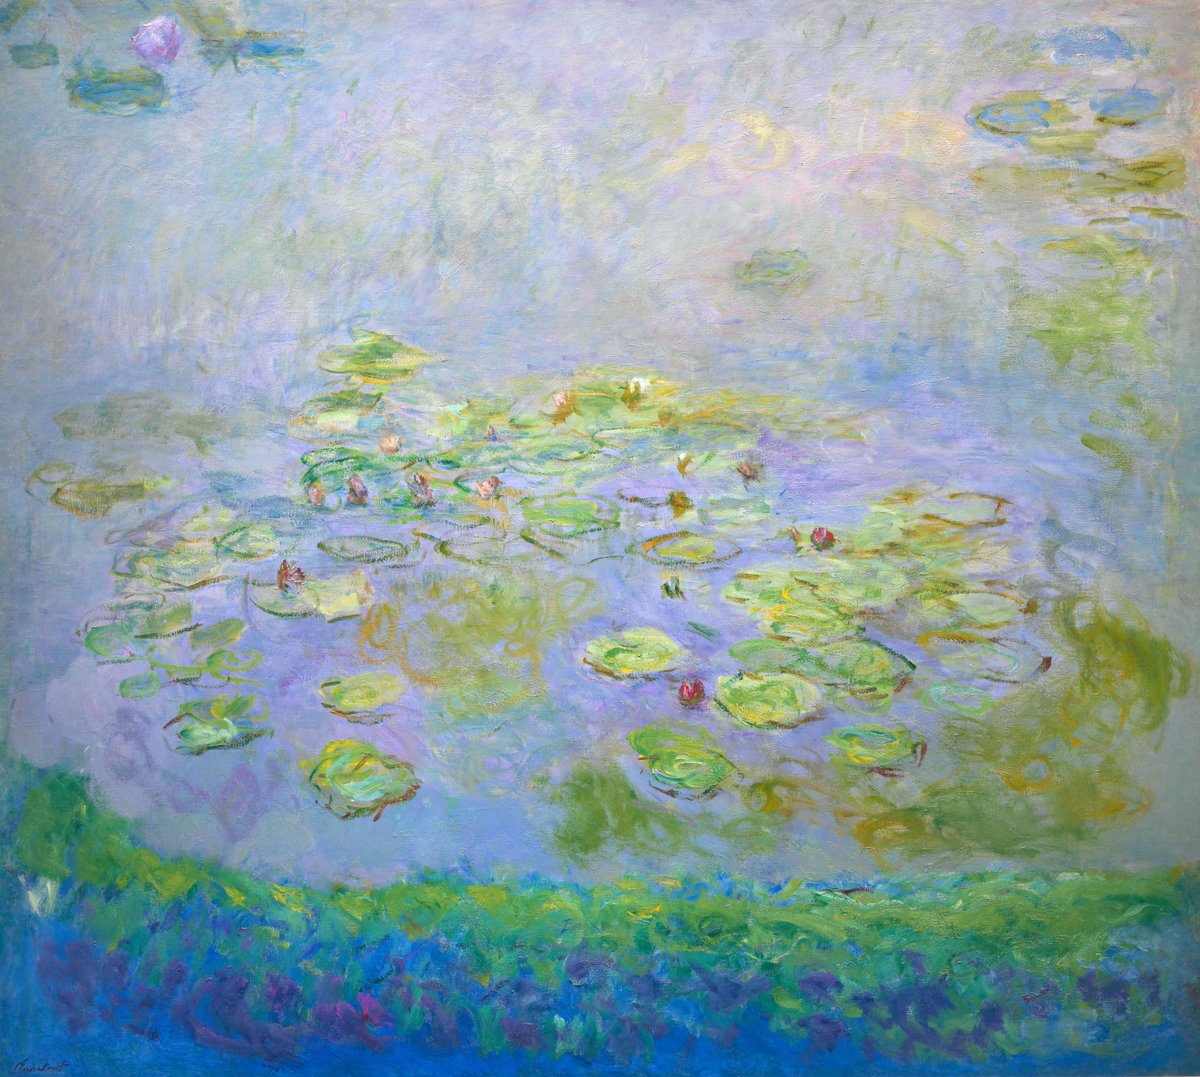 Claude Monet, Nymphéas [Waterlilies], c.1914-17, National Gallery of Australia, Kamberri/Canberra, purchased 1979 View this work in Gallery 13. The National Gallery is open from 10am–5pm, free with ticket. #NationalGalleryAU #Monet